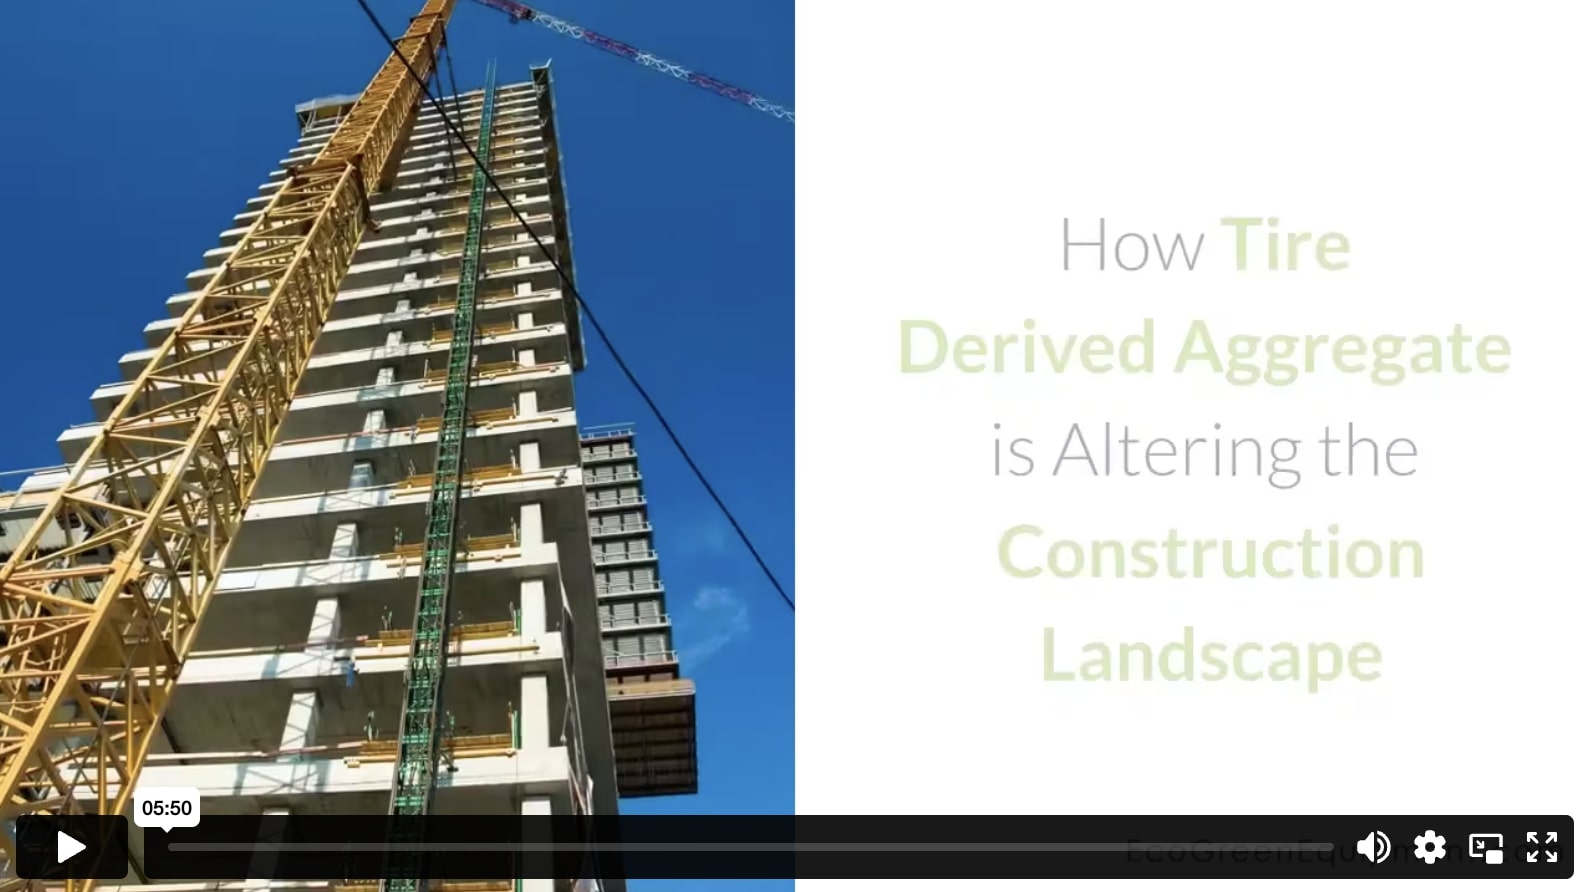 How Tire Derived Aggregate is Altering the Construction Landscape